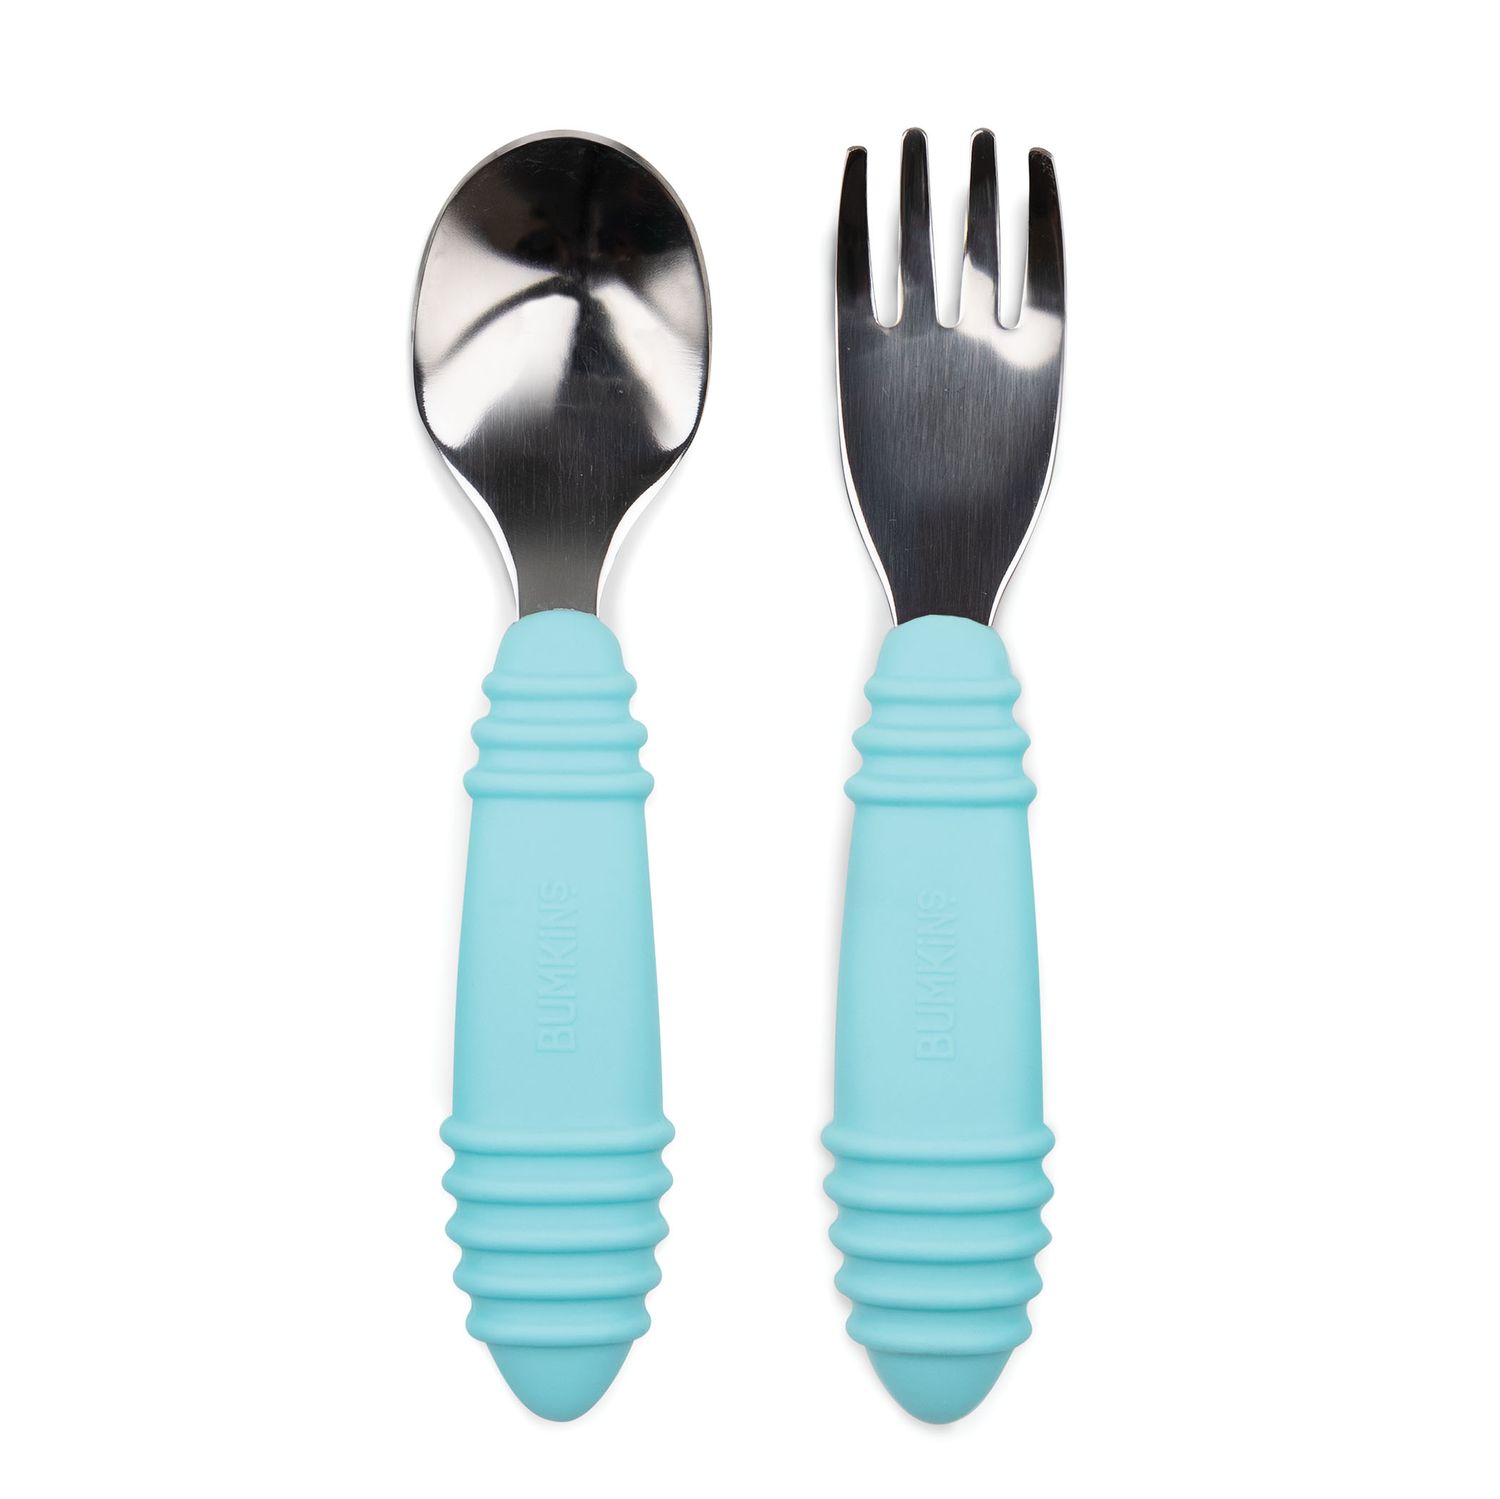 bent spoons for toddlers